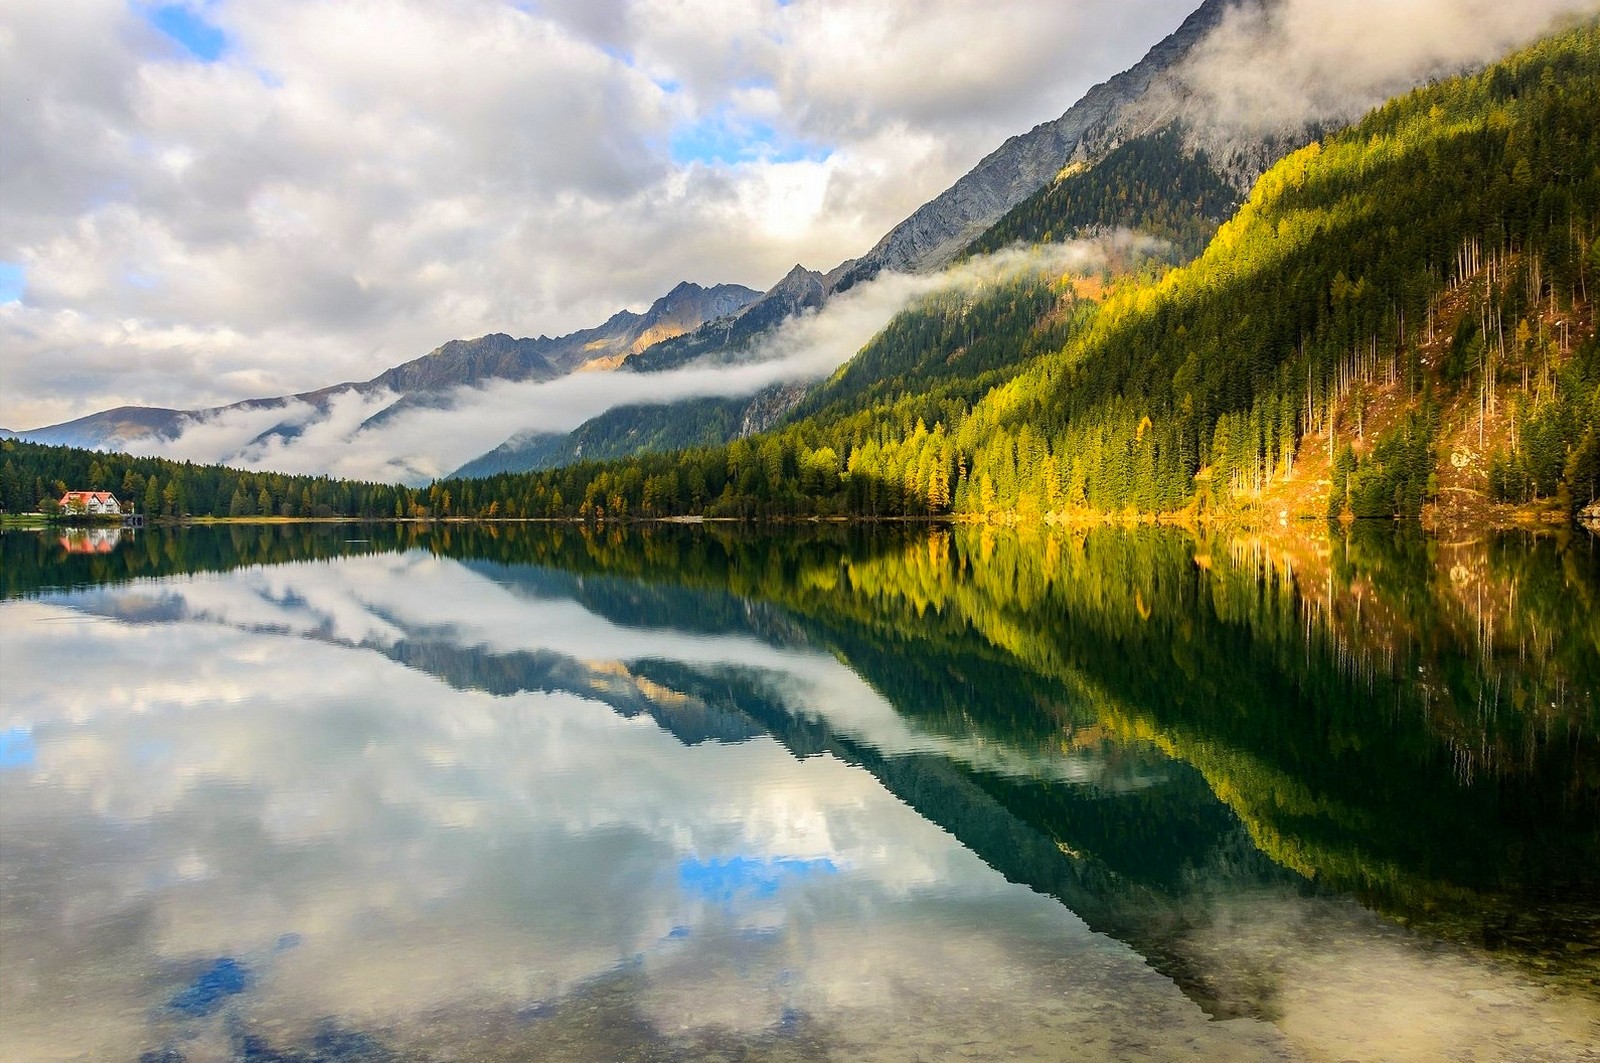 General 1600x1063 mountains forest lake clouds Italy reflection water Alps nature landscape green cabin